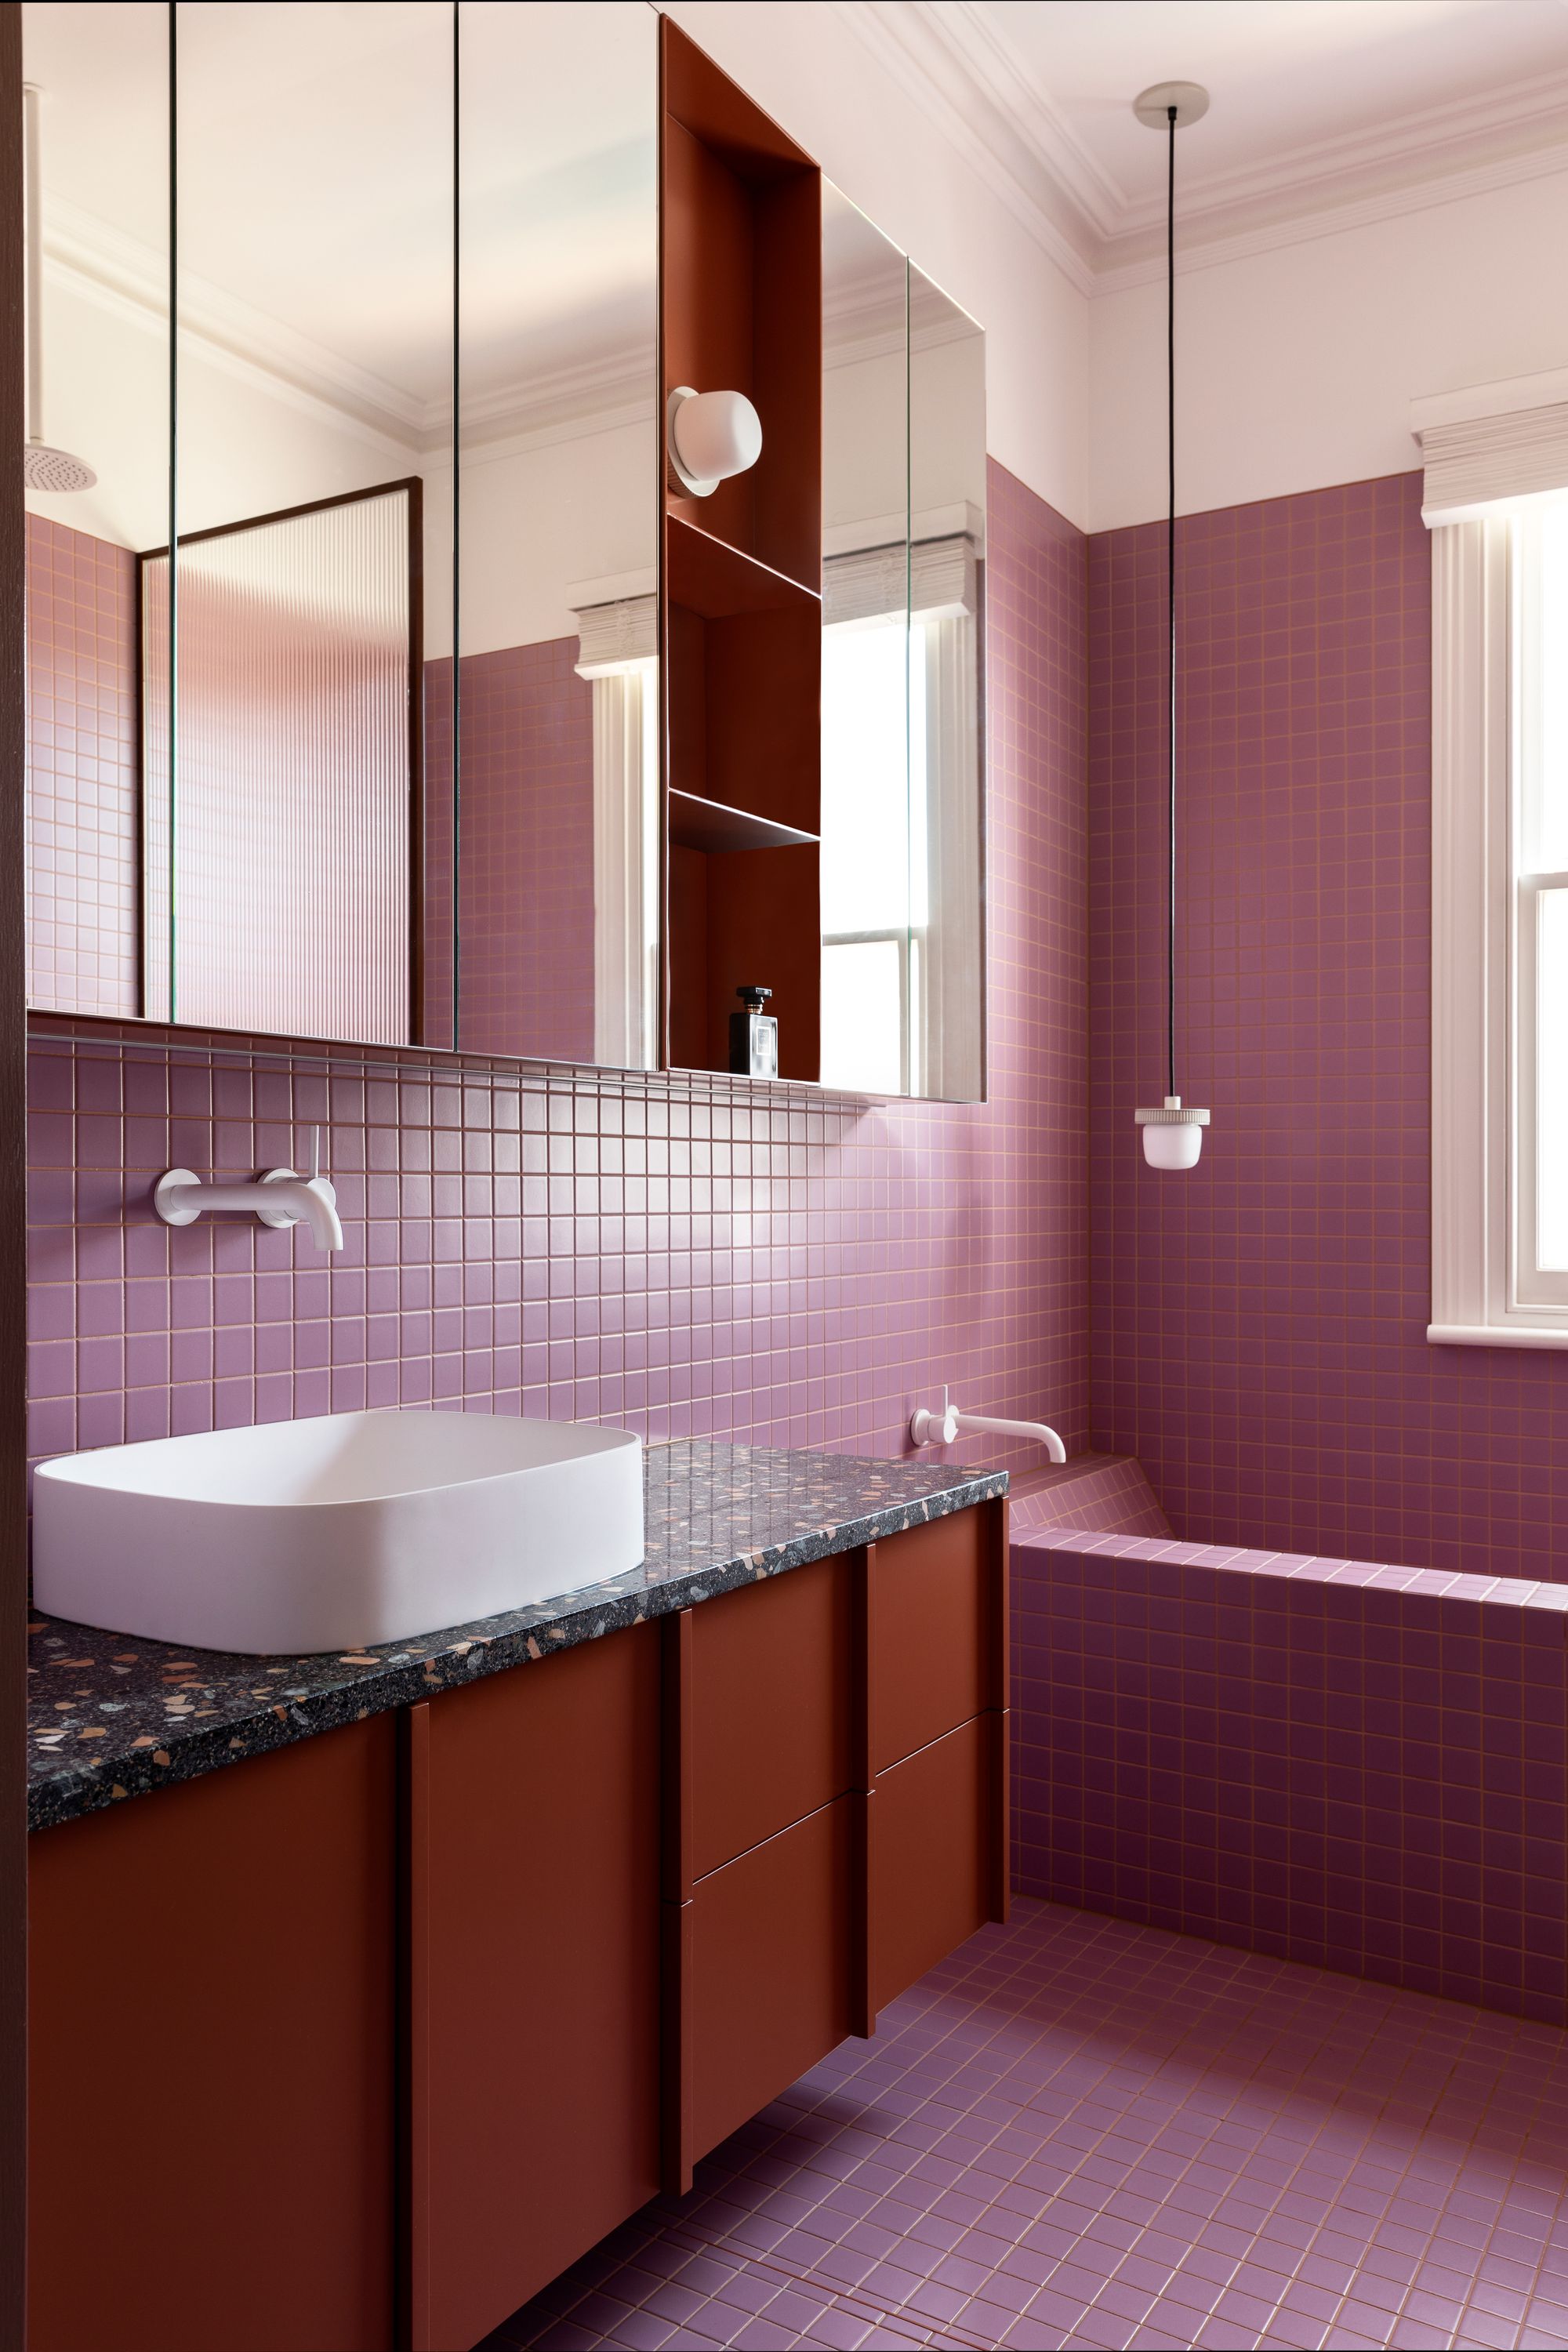 Herman by Wowowa Architecture.  Bright and bold pink and burgundy bathroom with terrazzo feature basin